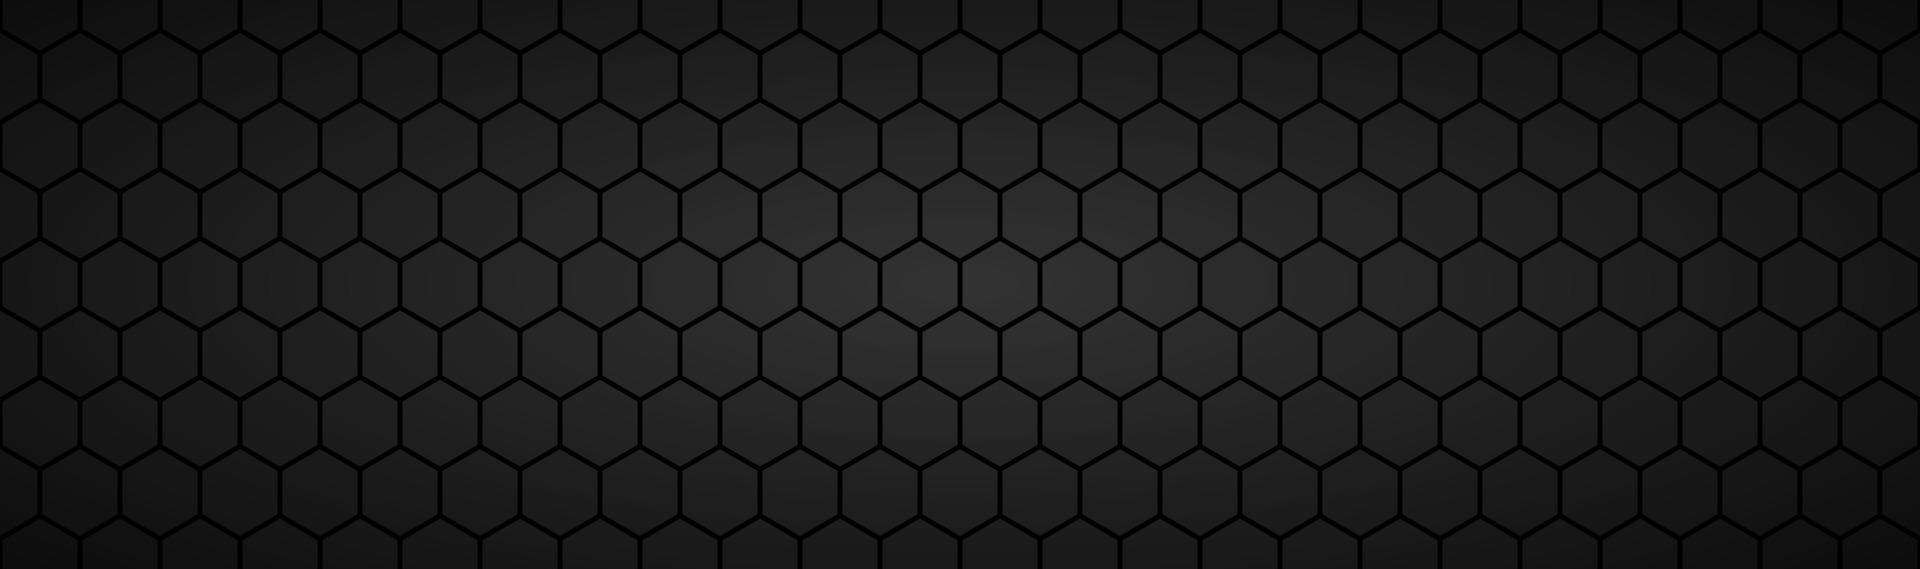 Abstract dark black geometric hexagonal mesh material header Metallic technology banner with blank space for your logo Vector abstract widescreen background